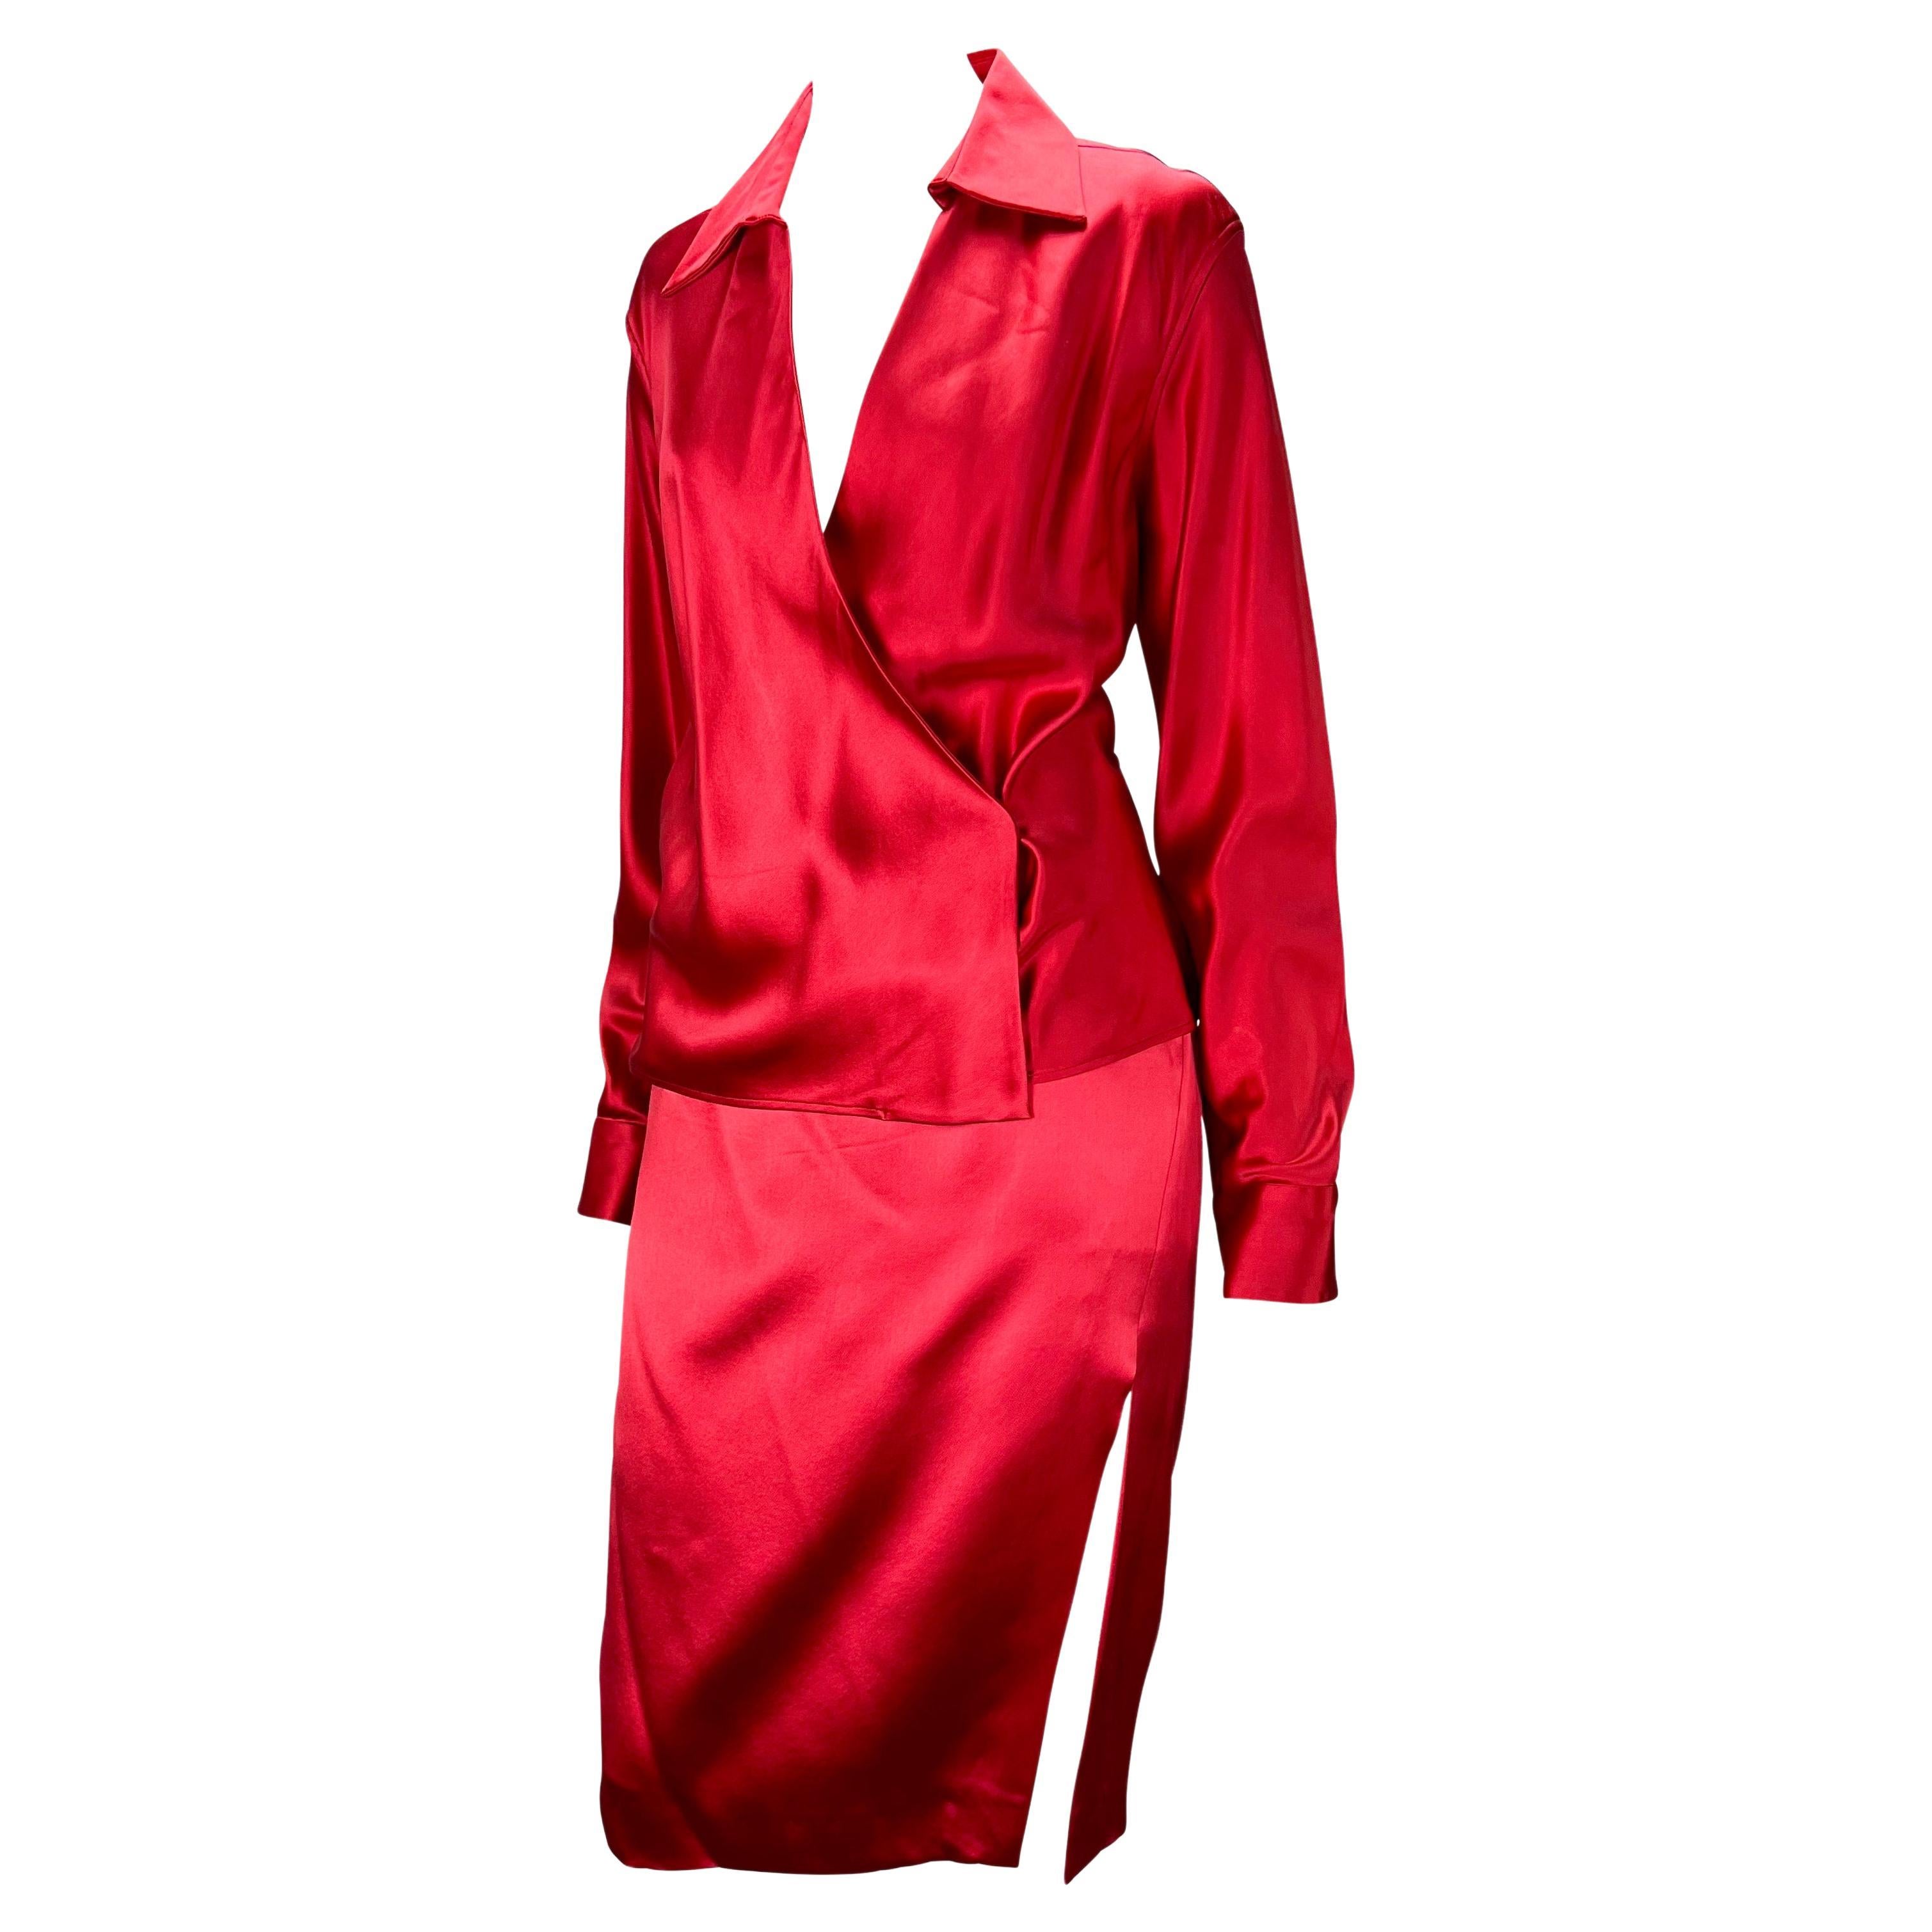 S/S 2001 Gucci by Tom Ford Red Plunging Satin Wrap Top Slit Skirt Set